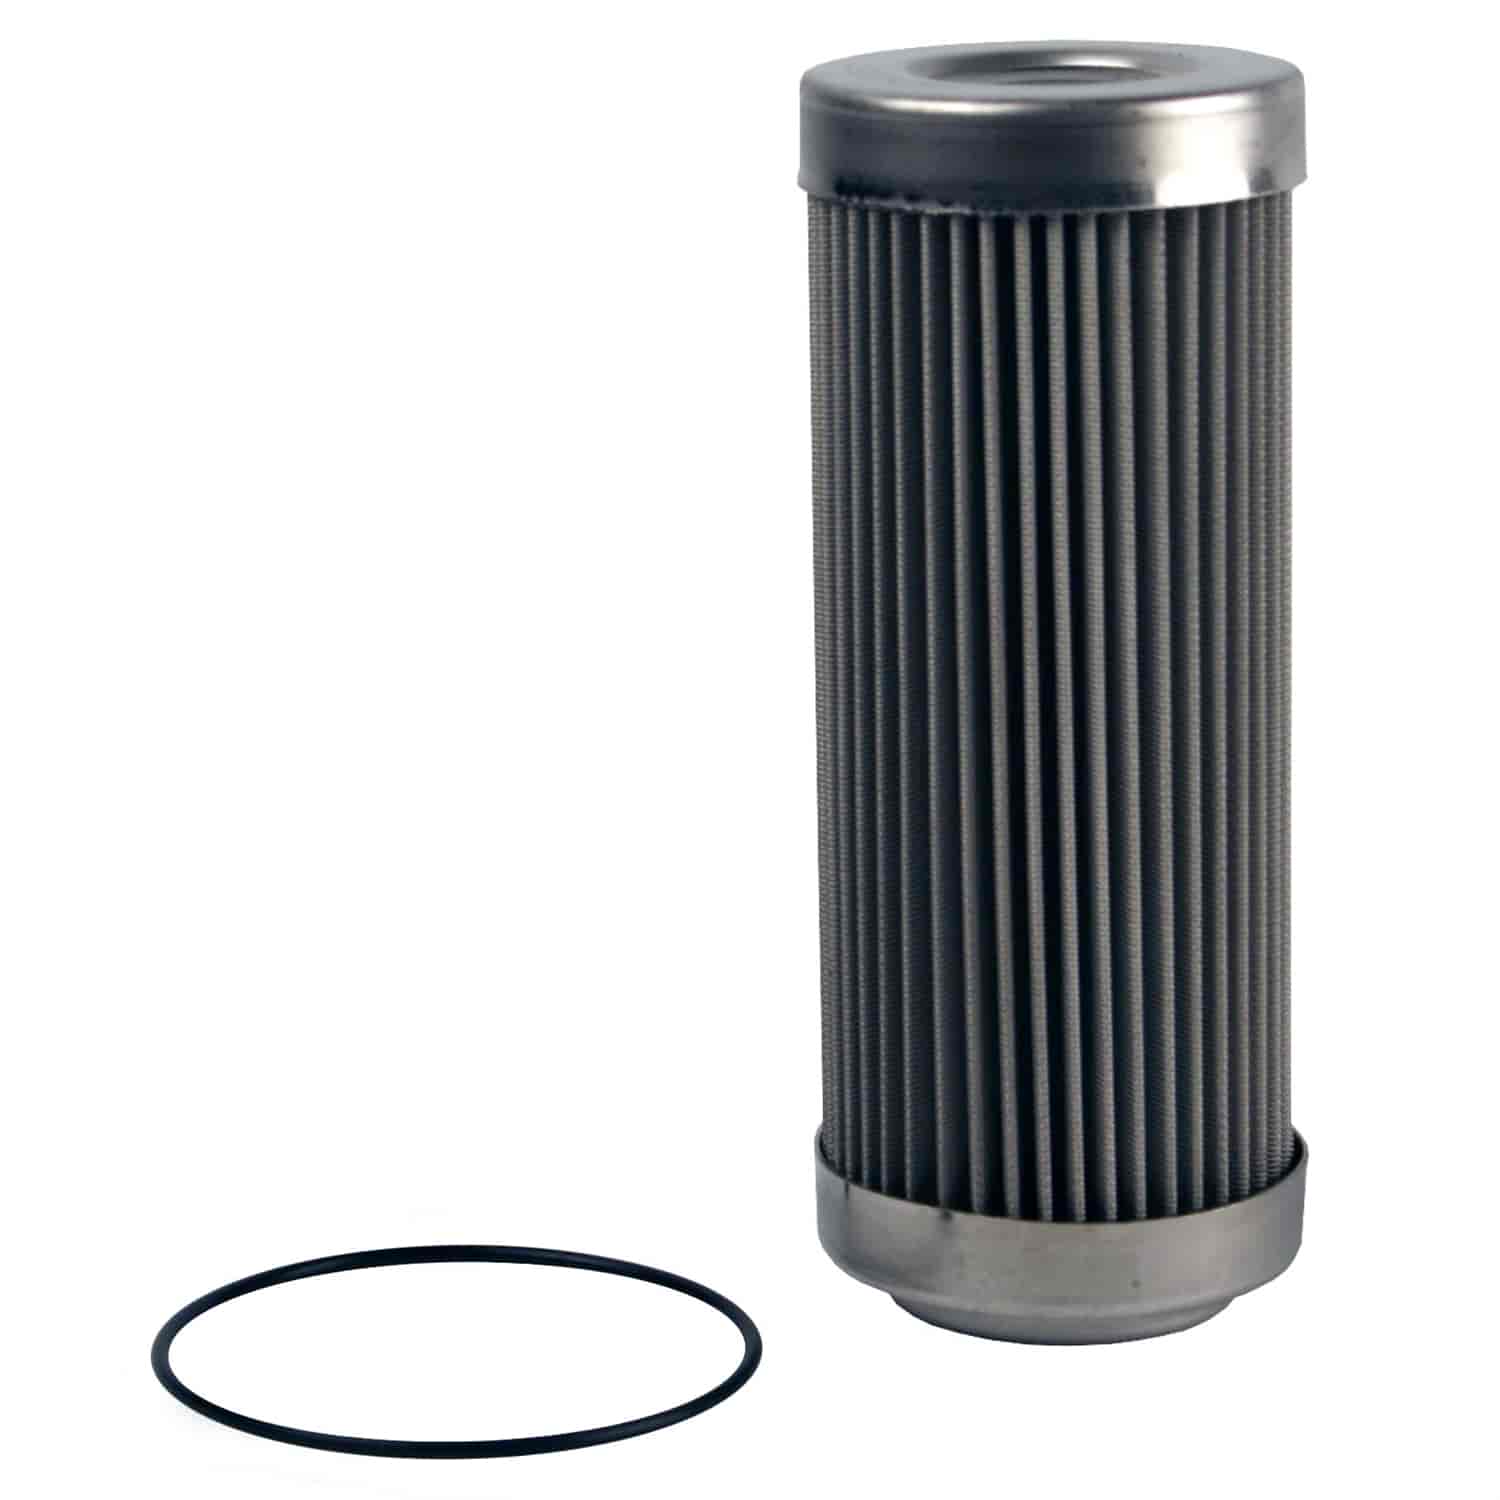 Replacement Fuel Filter Element 40 micron for part